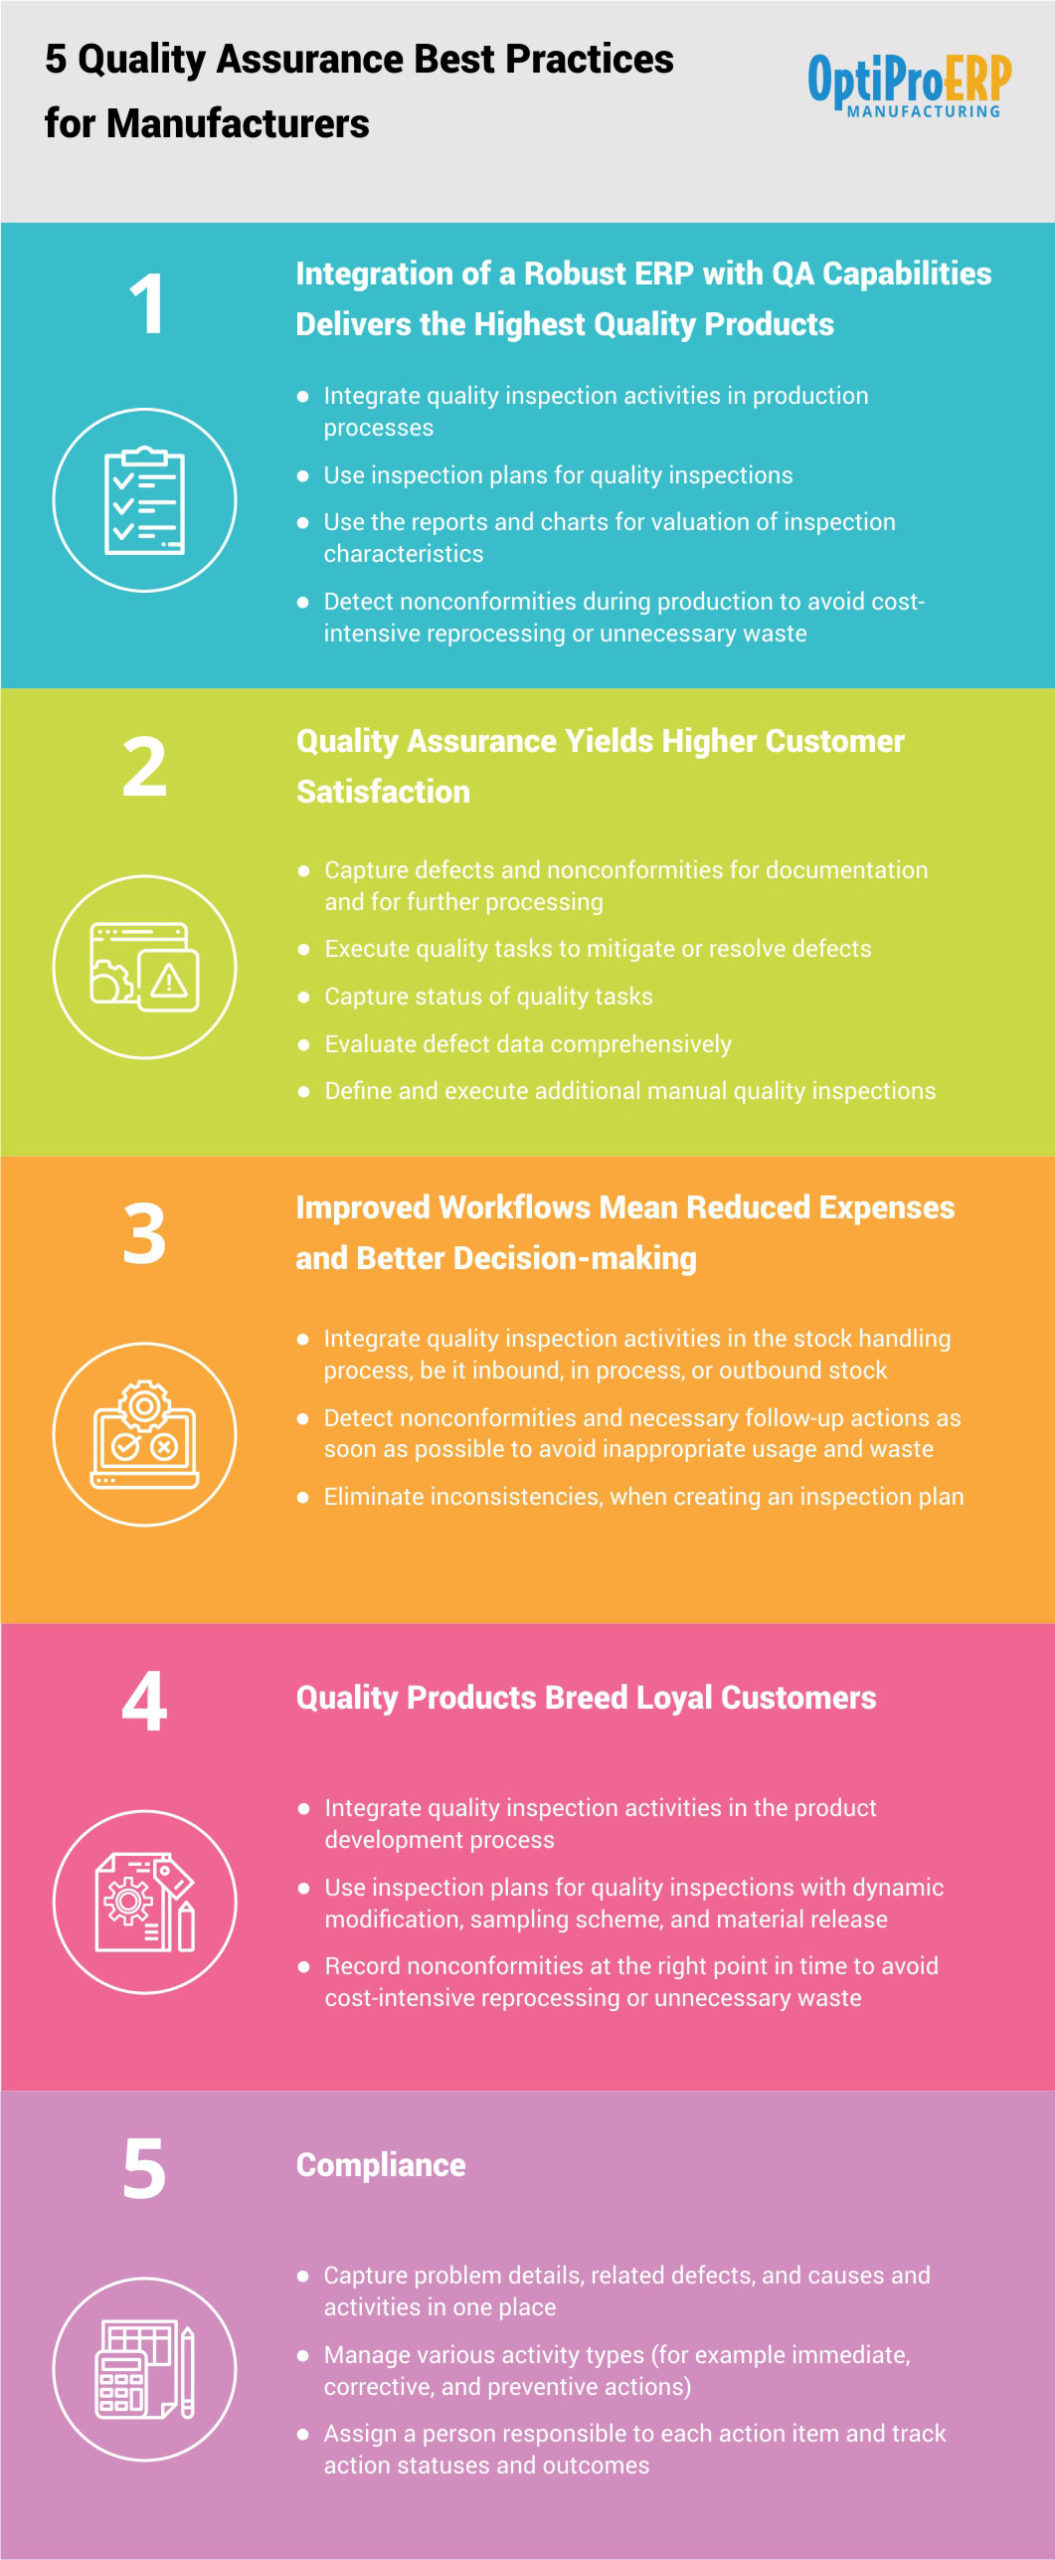 5 Quality Assurance Best Practices for Manufacturers 